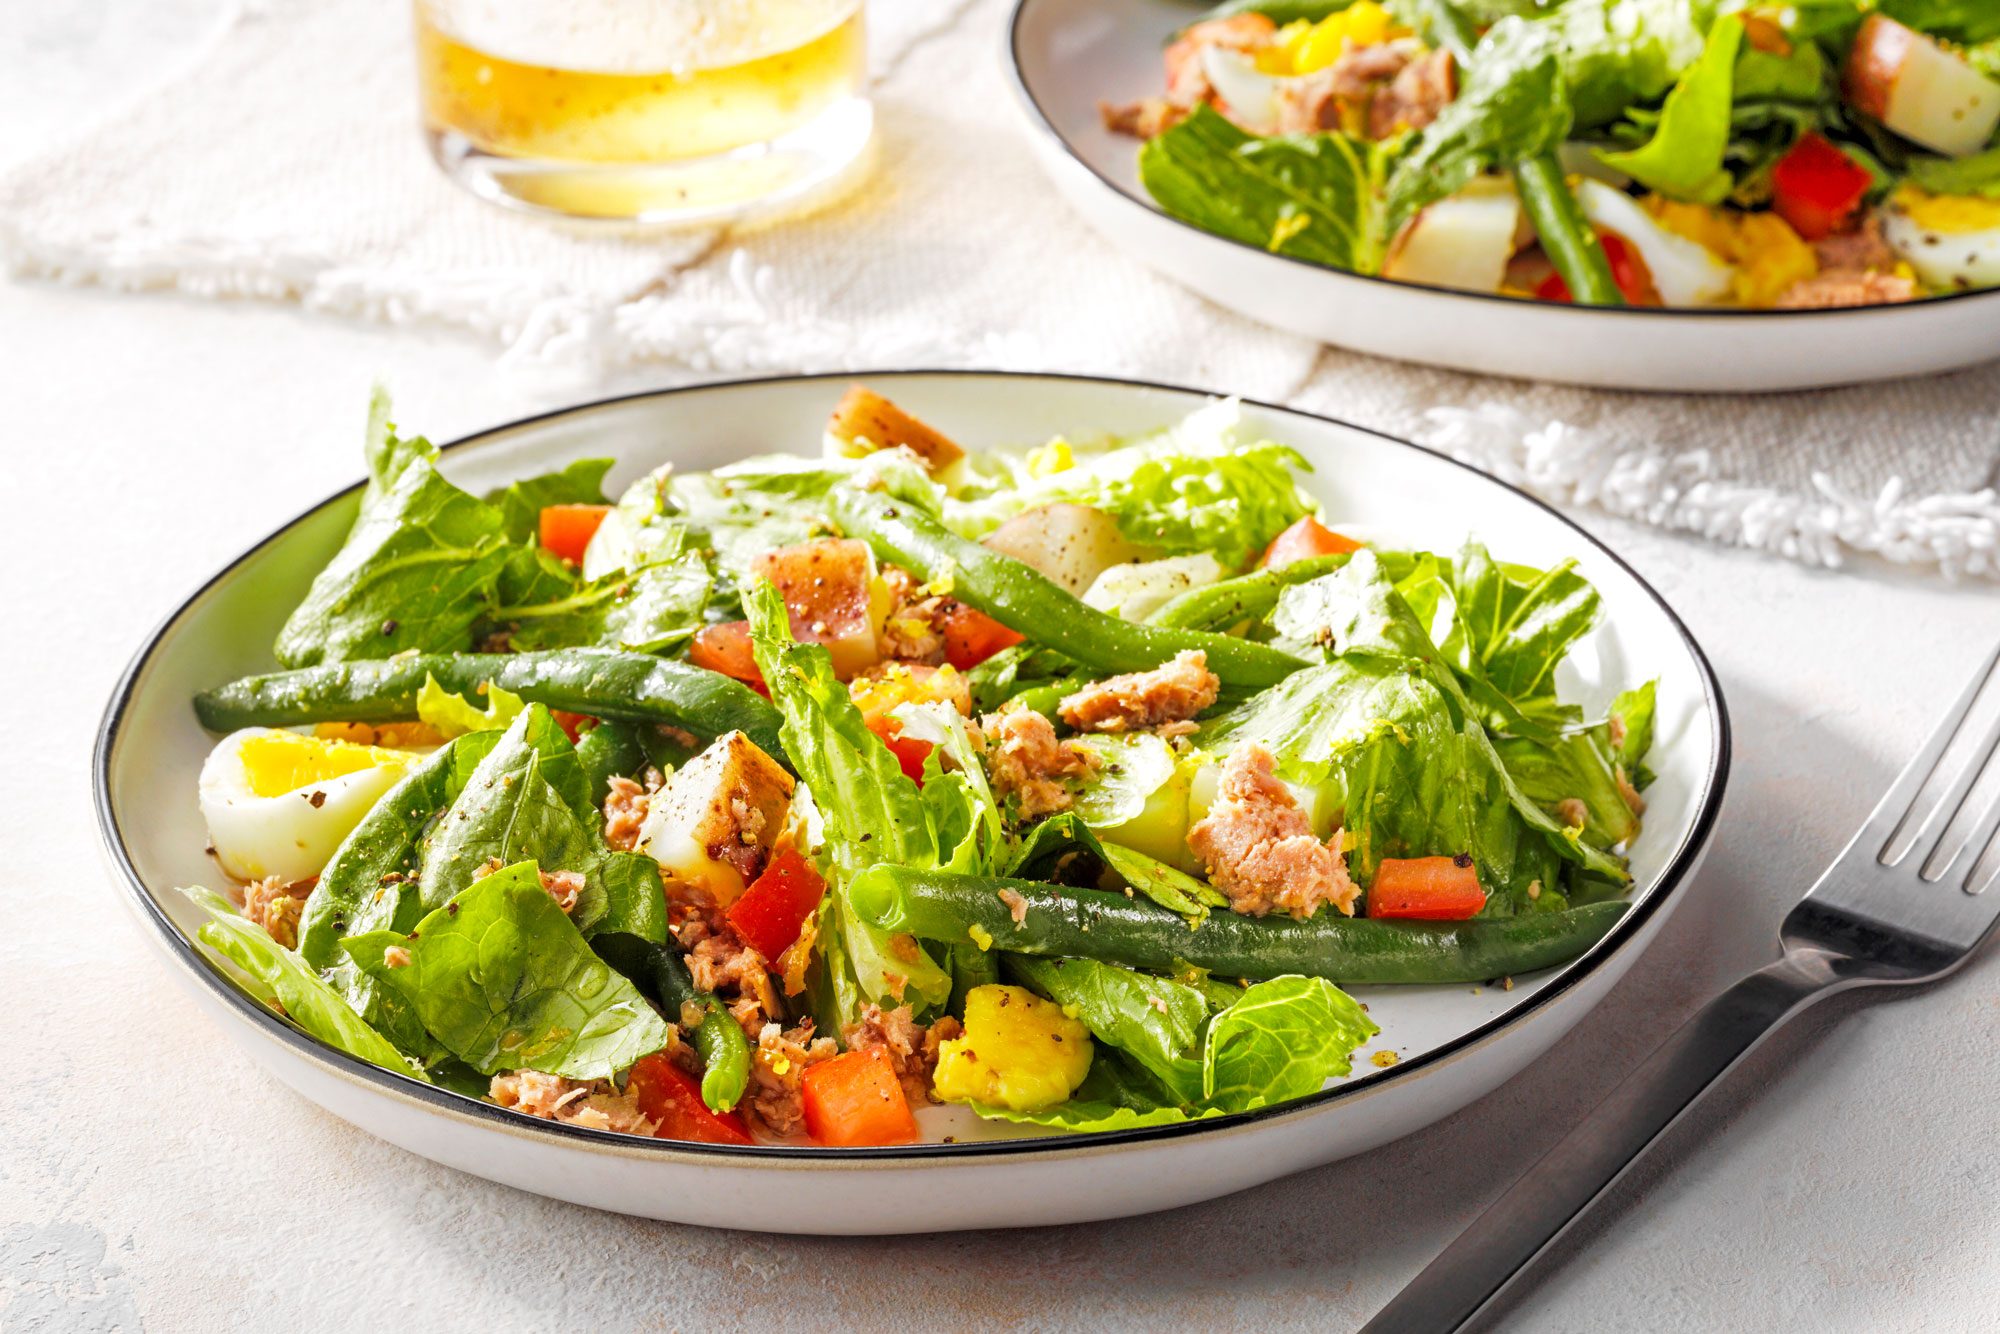 Vibrant Tuna Nicoise salad includes tuna, mixed greens, cherry tomatoes, olives, eggs, and green beans